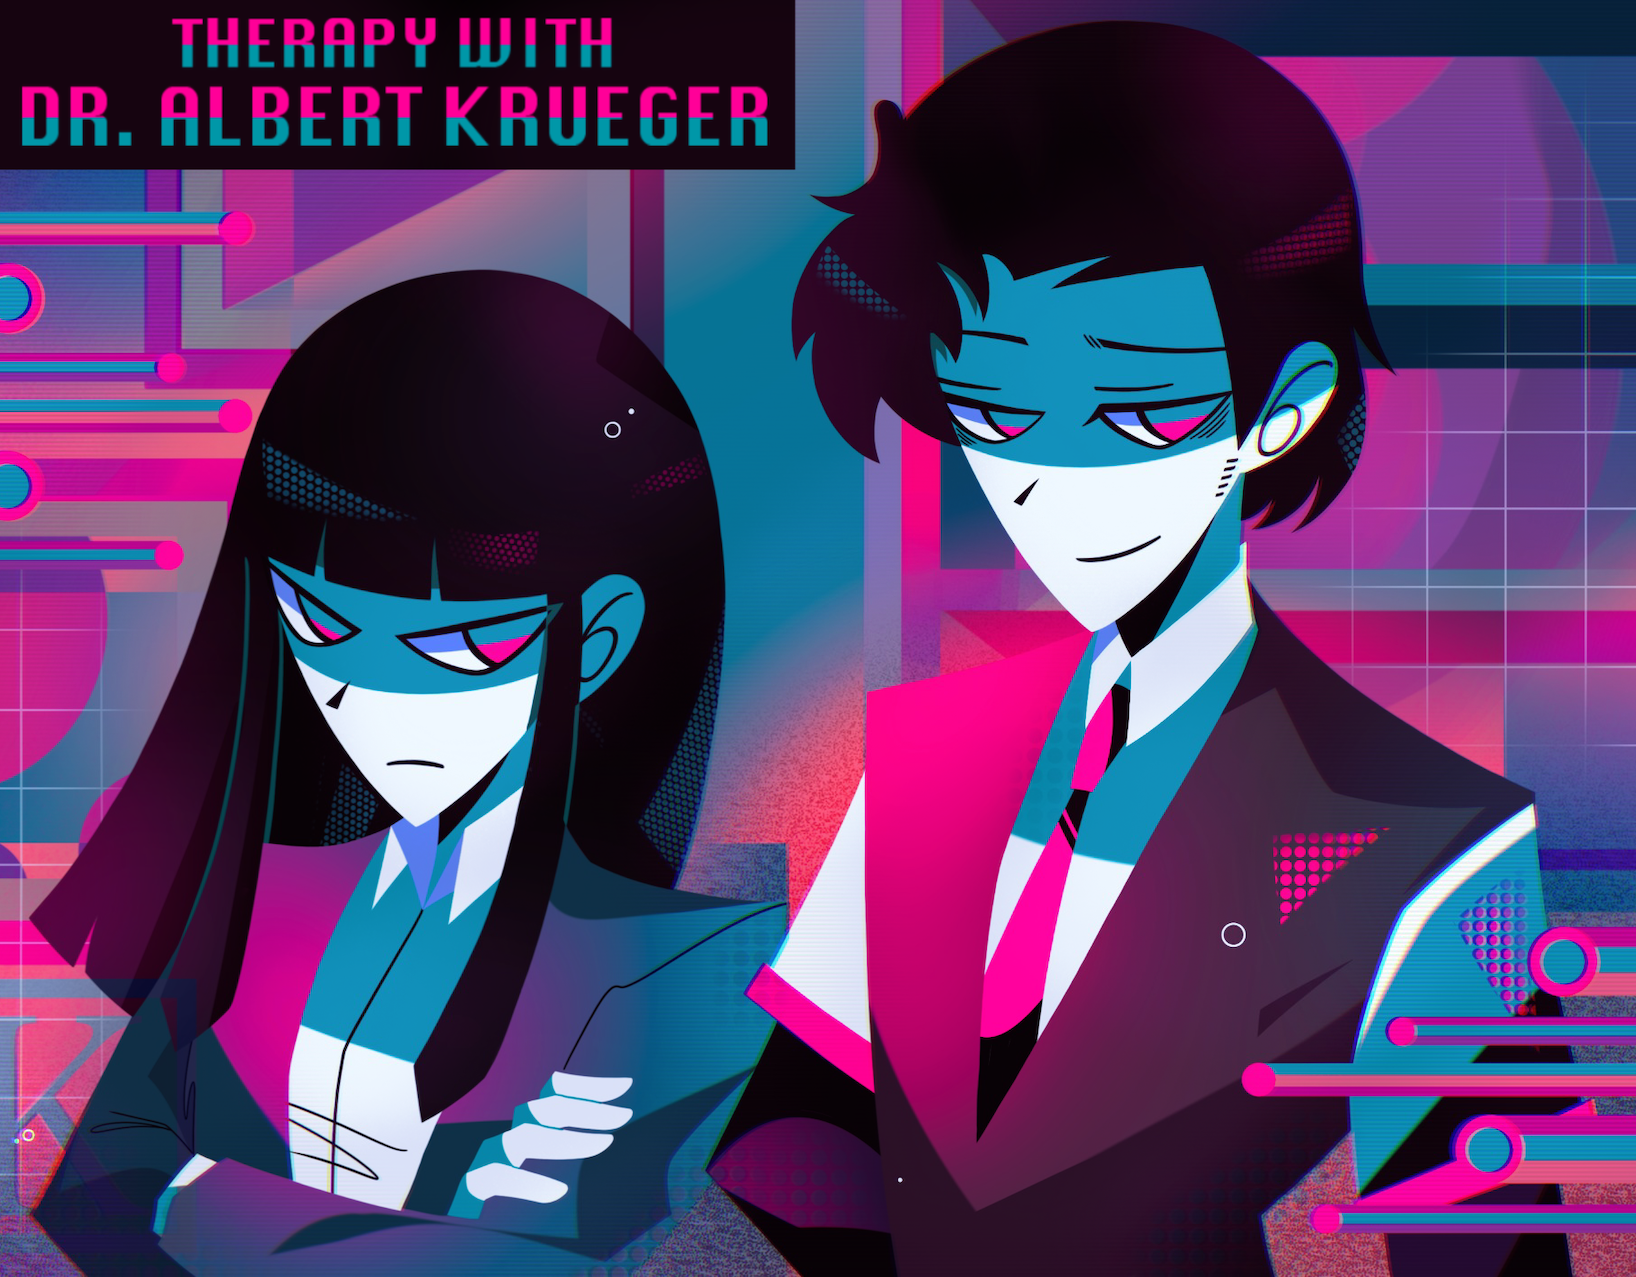 Therapy with Dr. Albert Krueger by dino999z